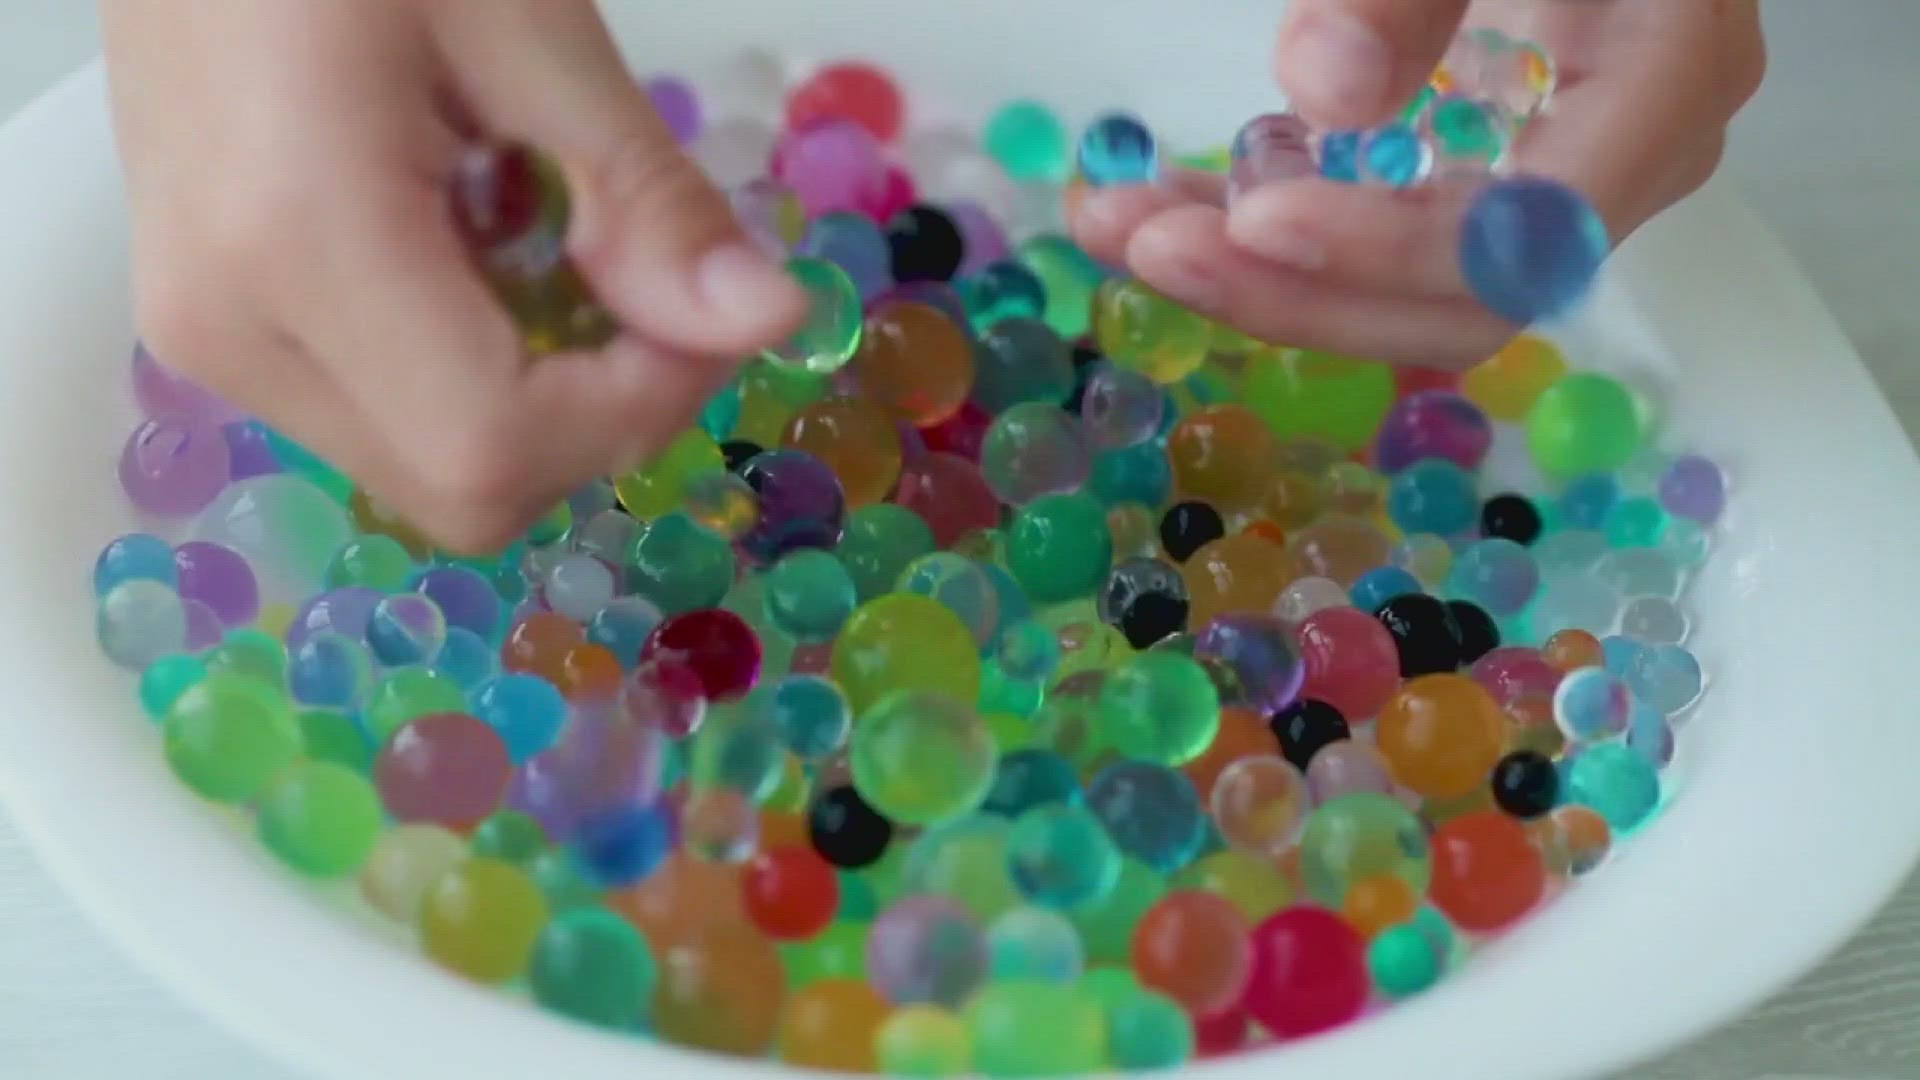 Some major retailers to stop selling Water Beads marketed to children